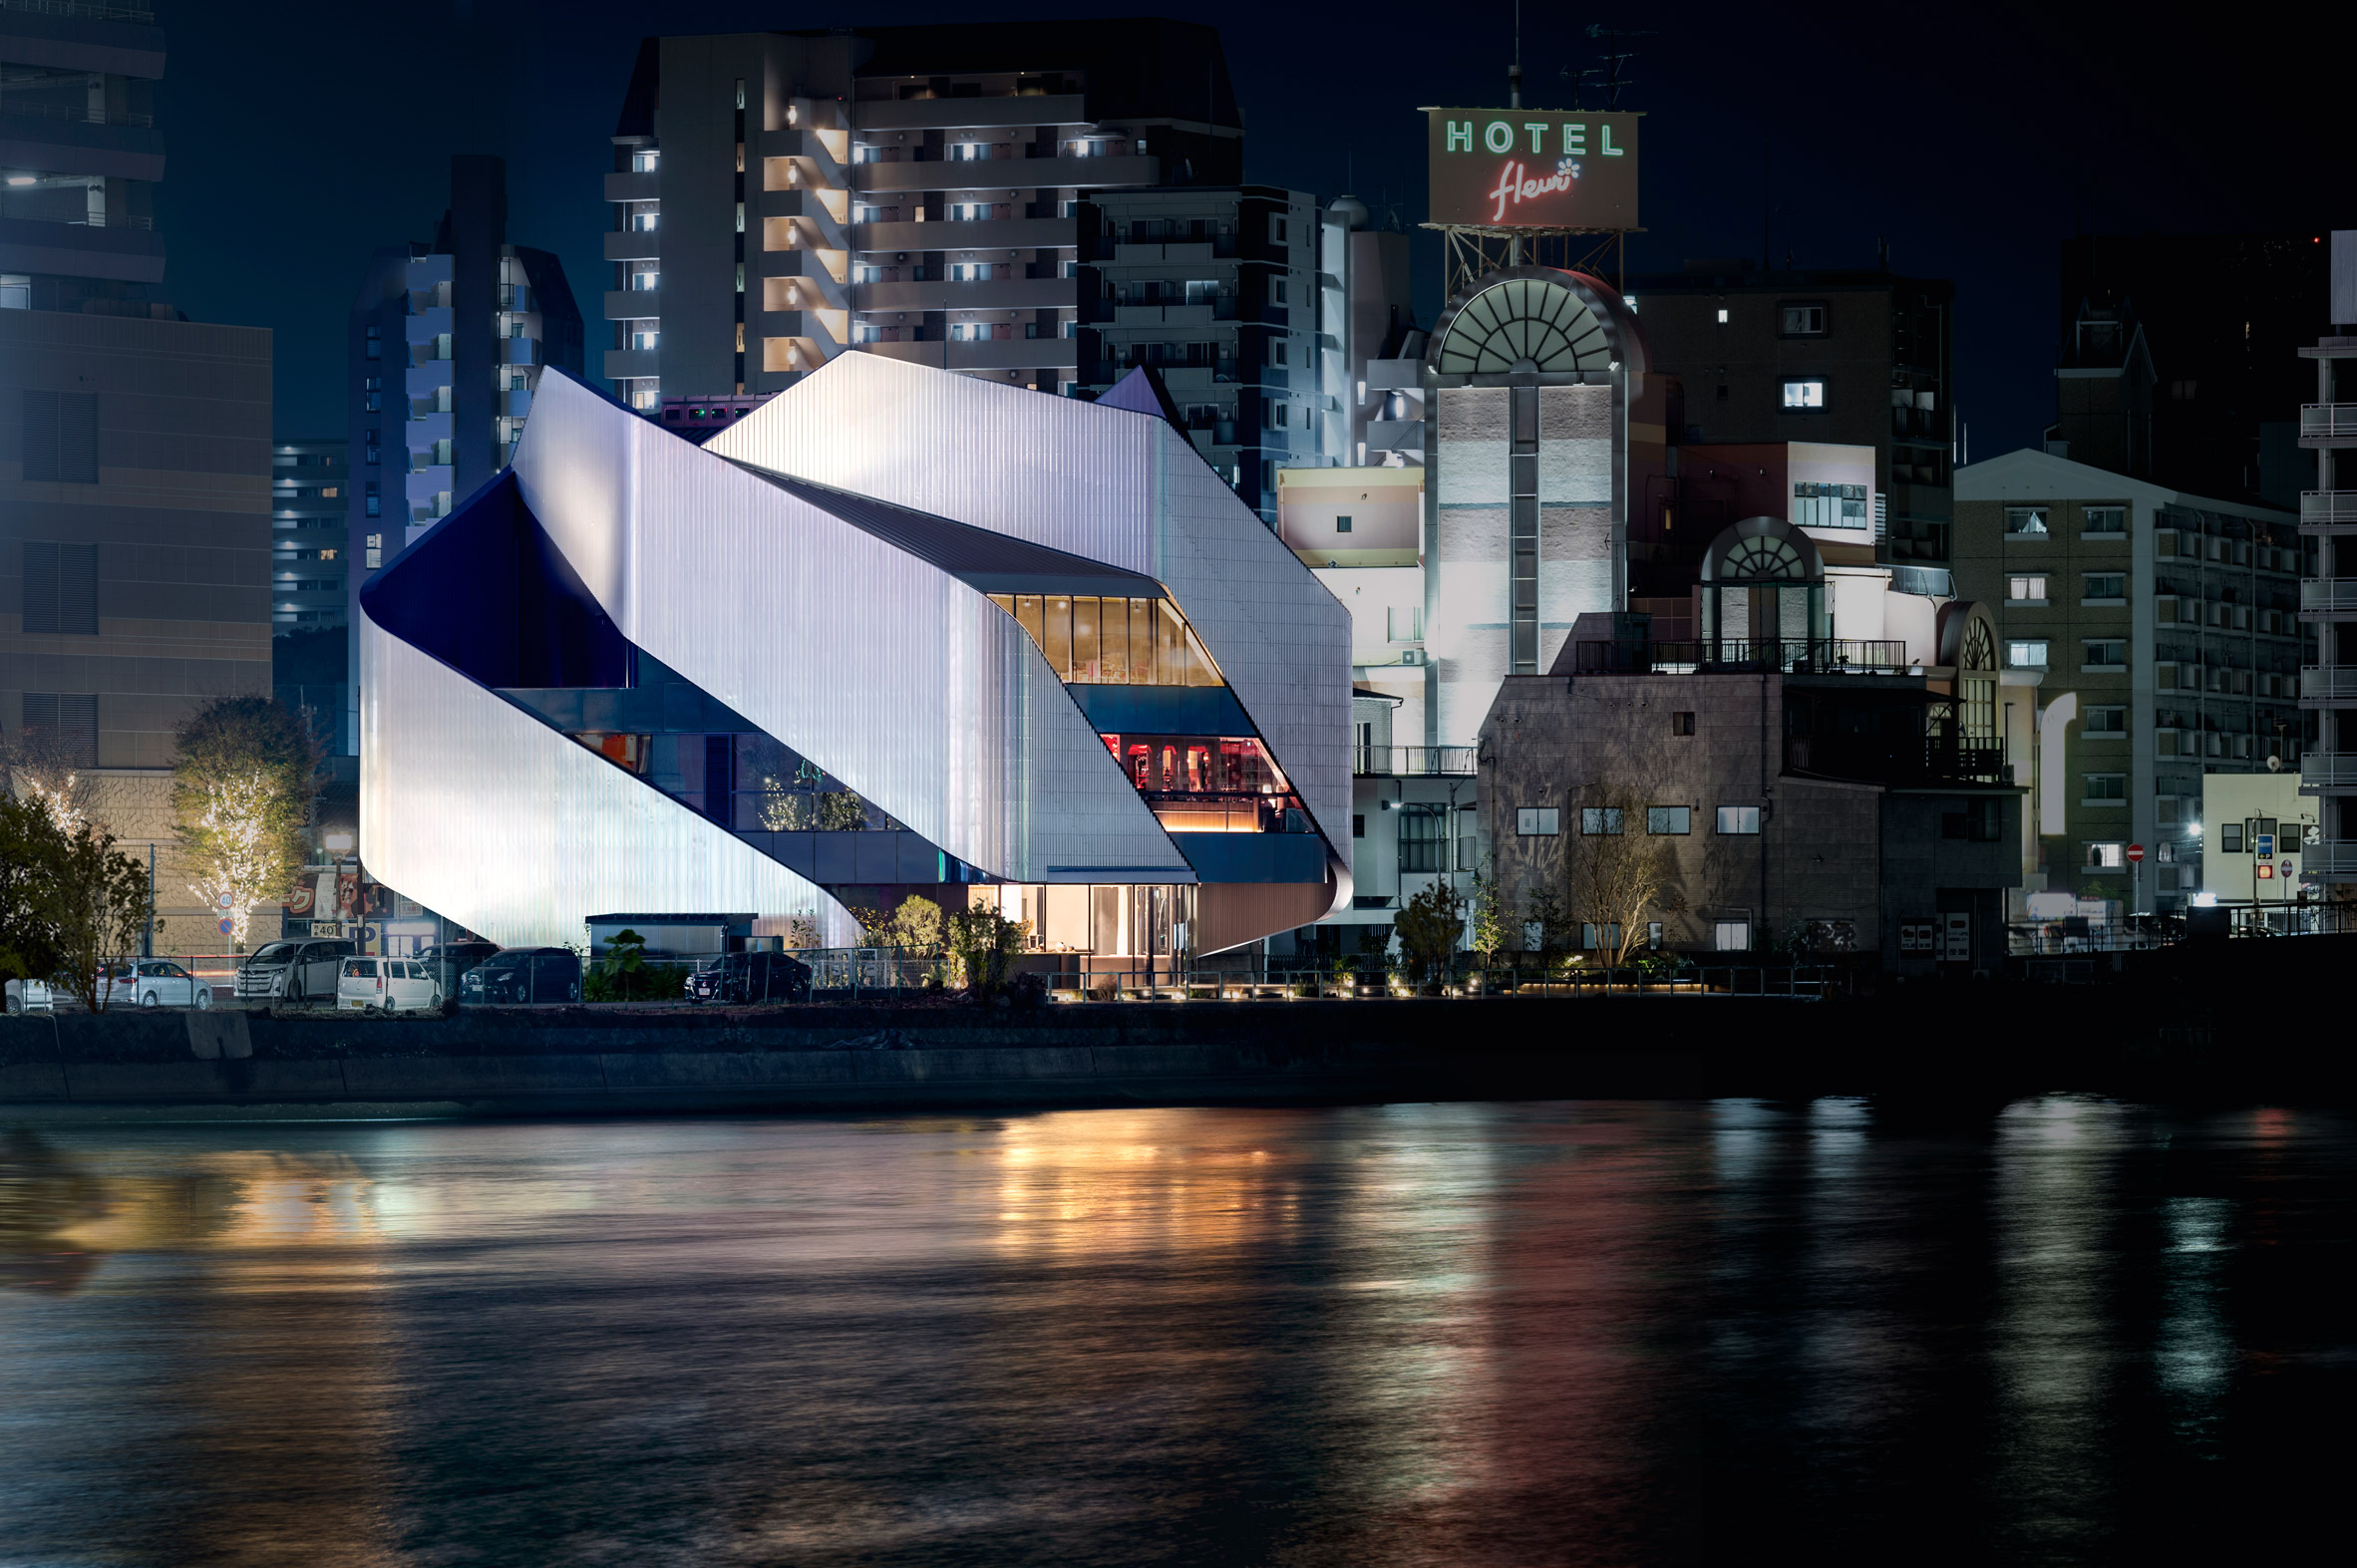 A theatre building on a city waterfront with sweeping steel panels covering the exterior